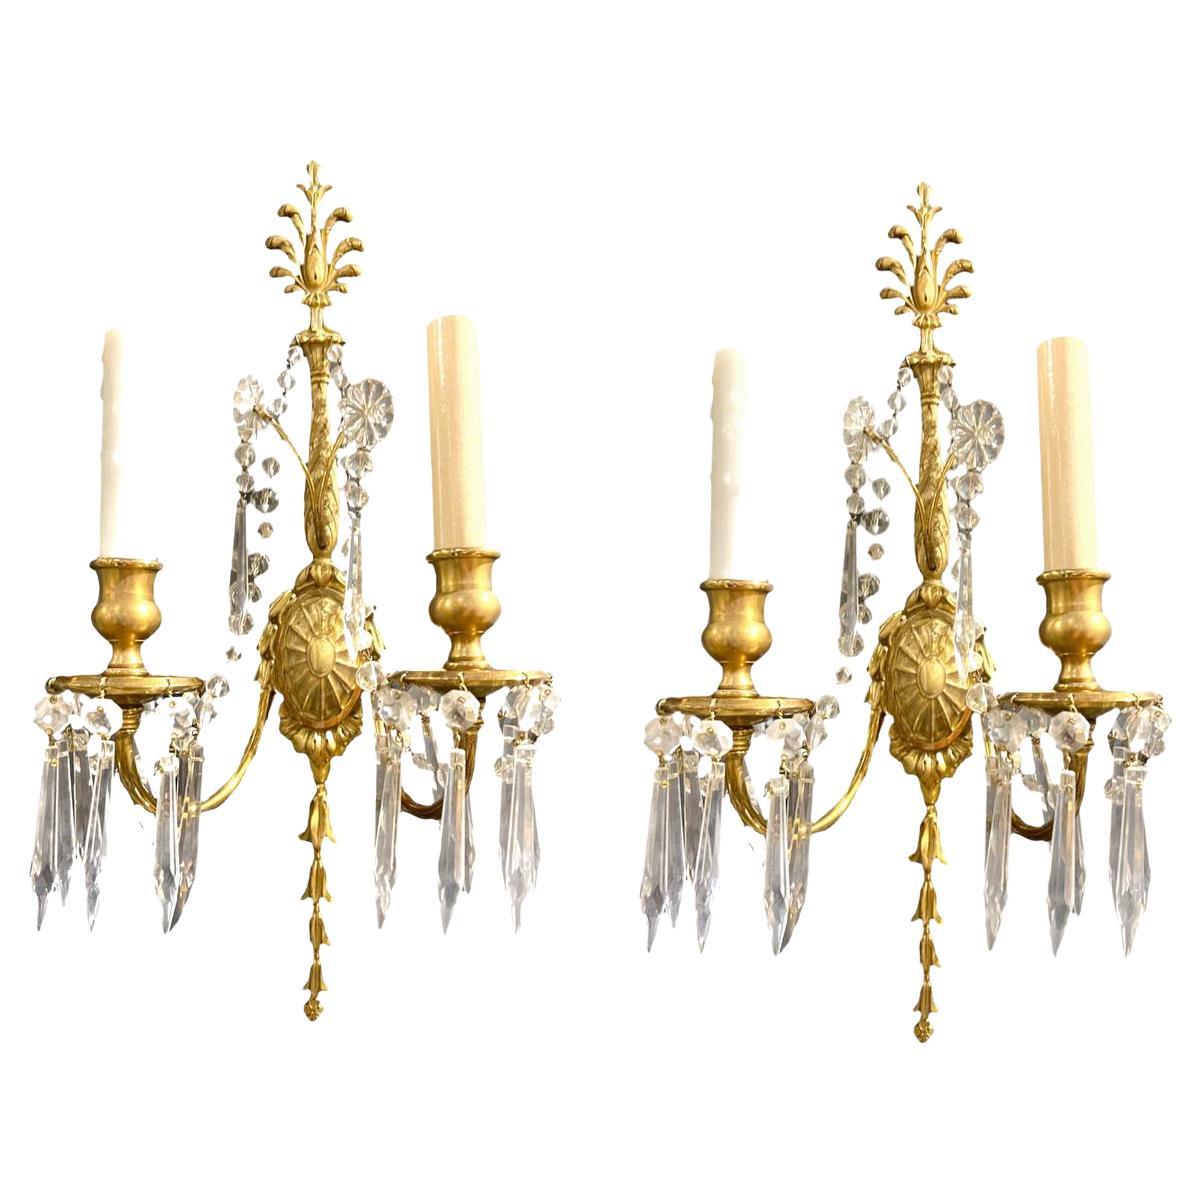 1920's Caldwell Gilt Bronze Sconces with Crystal Hangings For Sale